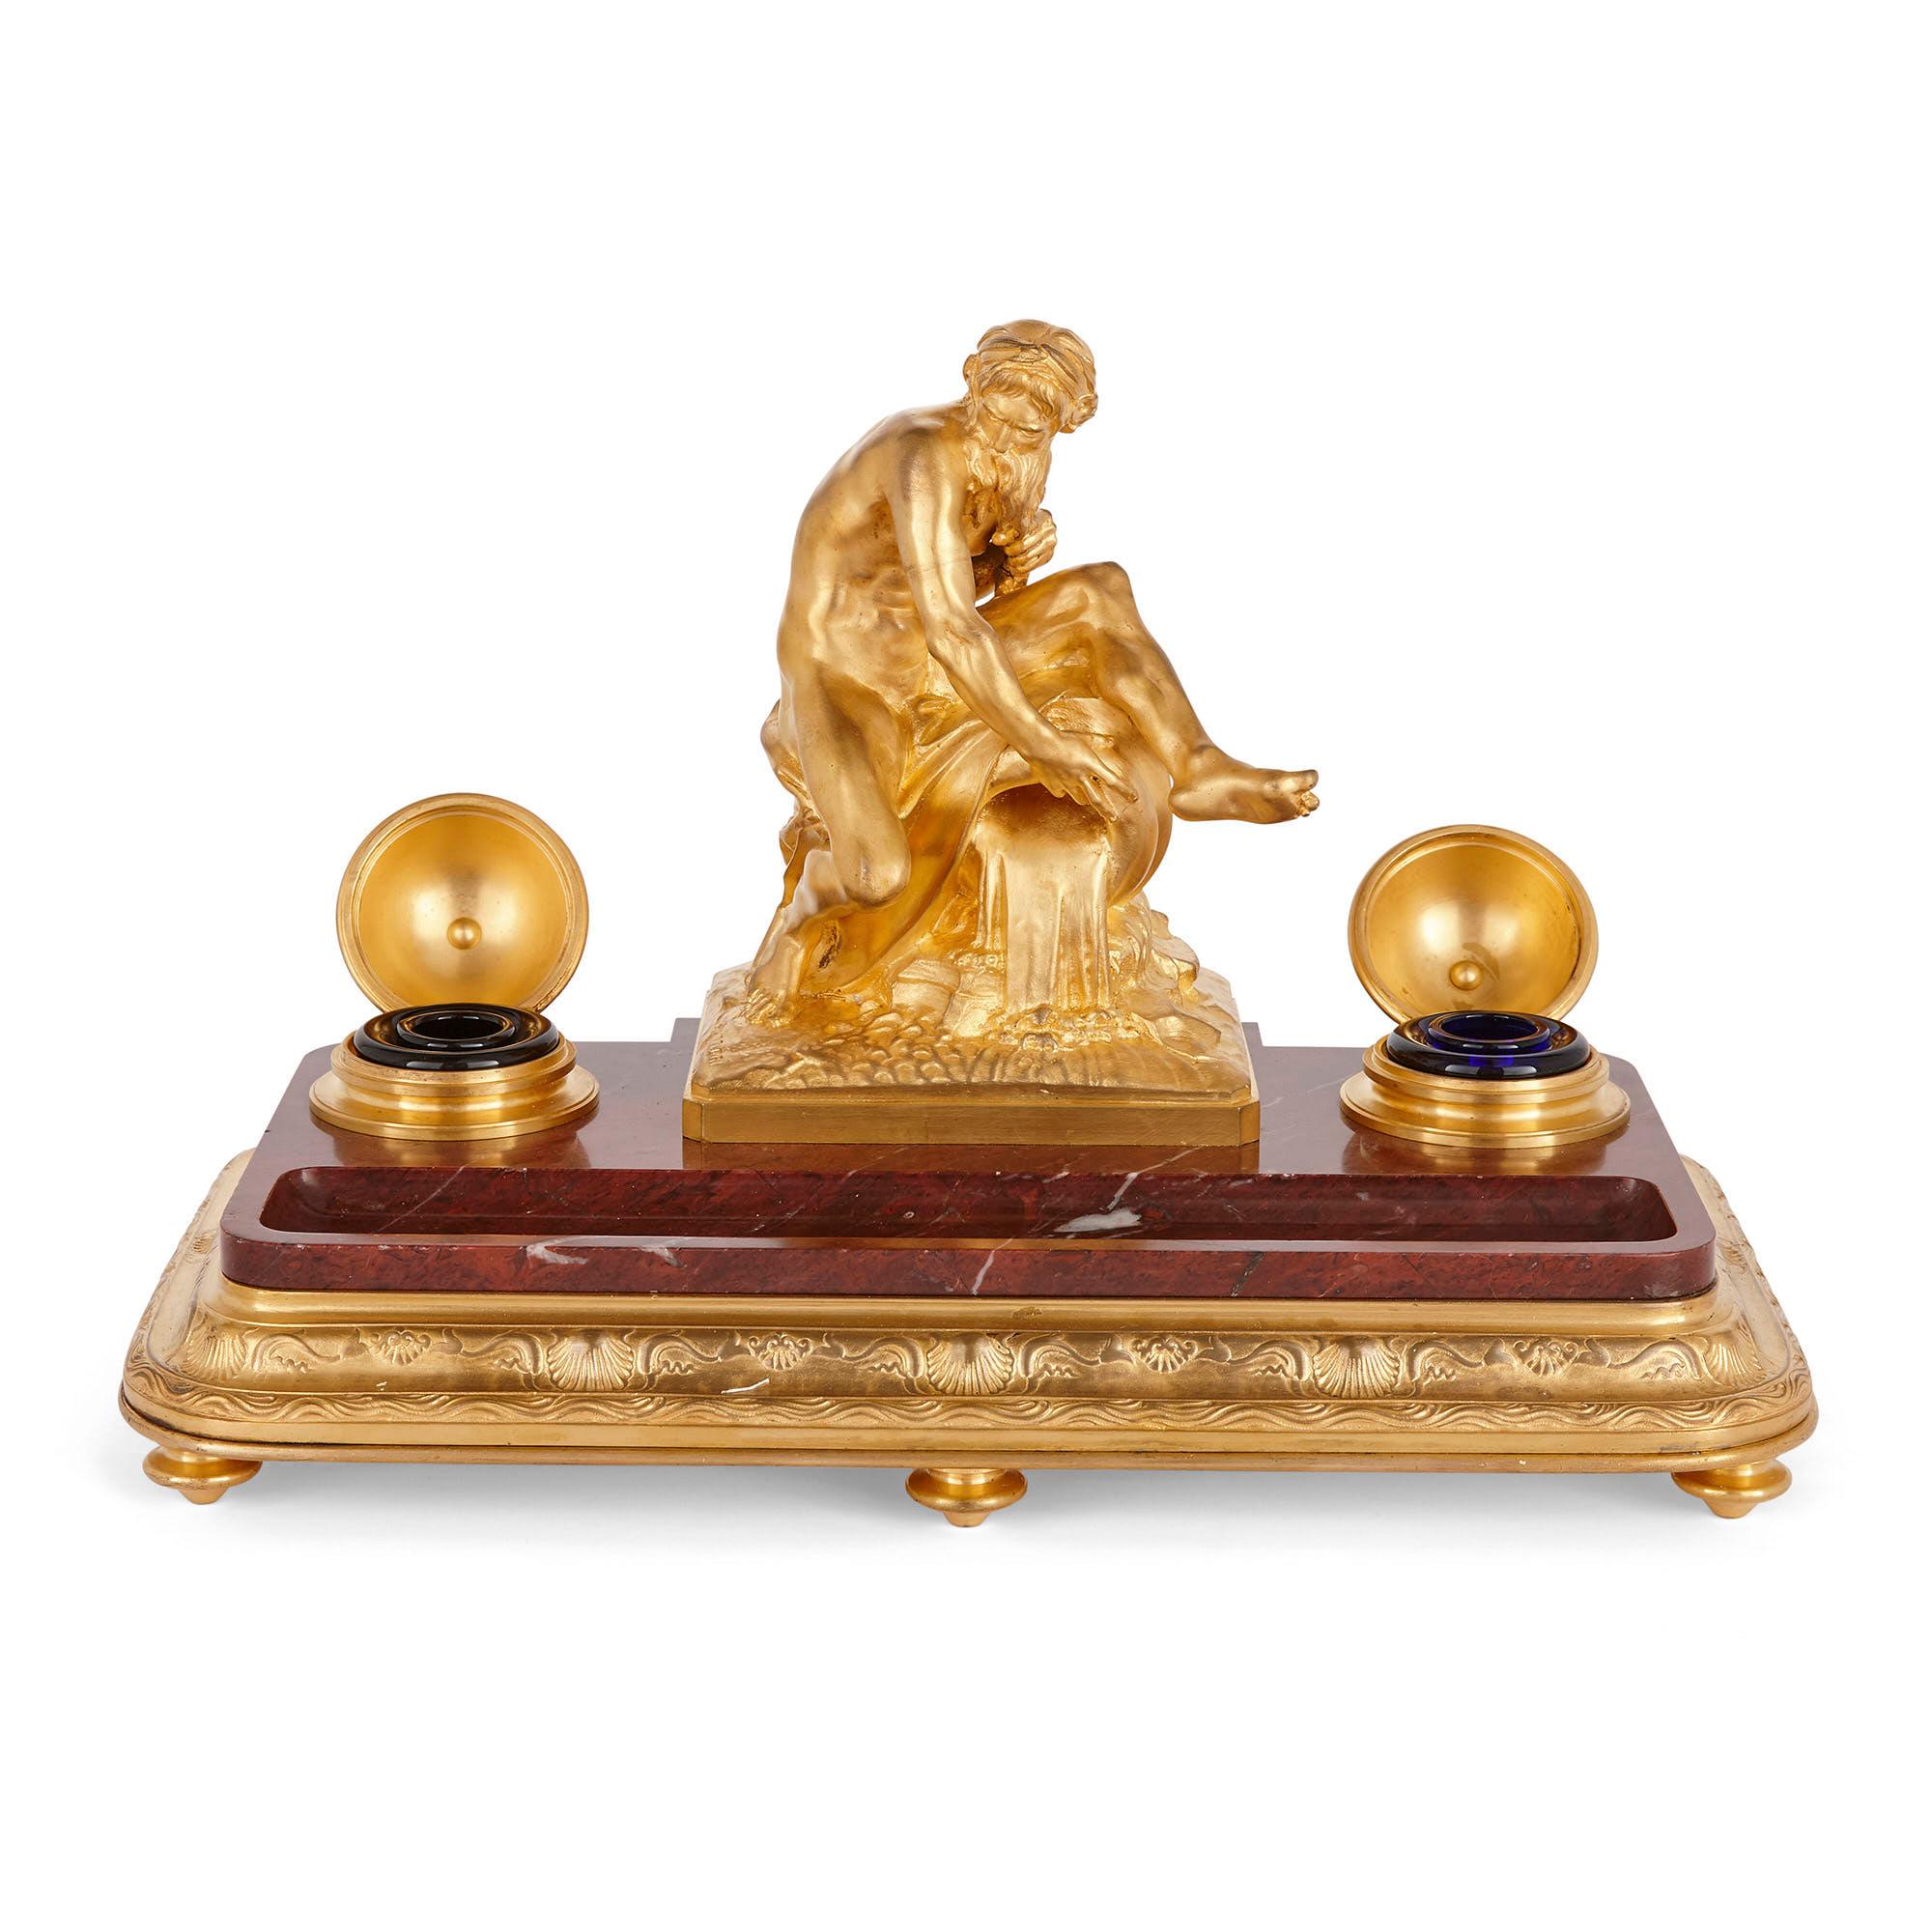 Neoclassical griotte marble and gilt bronze ink stand by Barbedienne
French, 19th century
Size: Height 25cm, width 36cm, 21cm

This magnificent inkstand is by Ferdinand Barbedienne, one of the leading metalworkers working in France during the